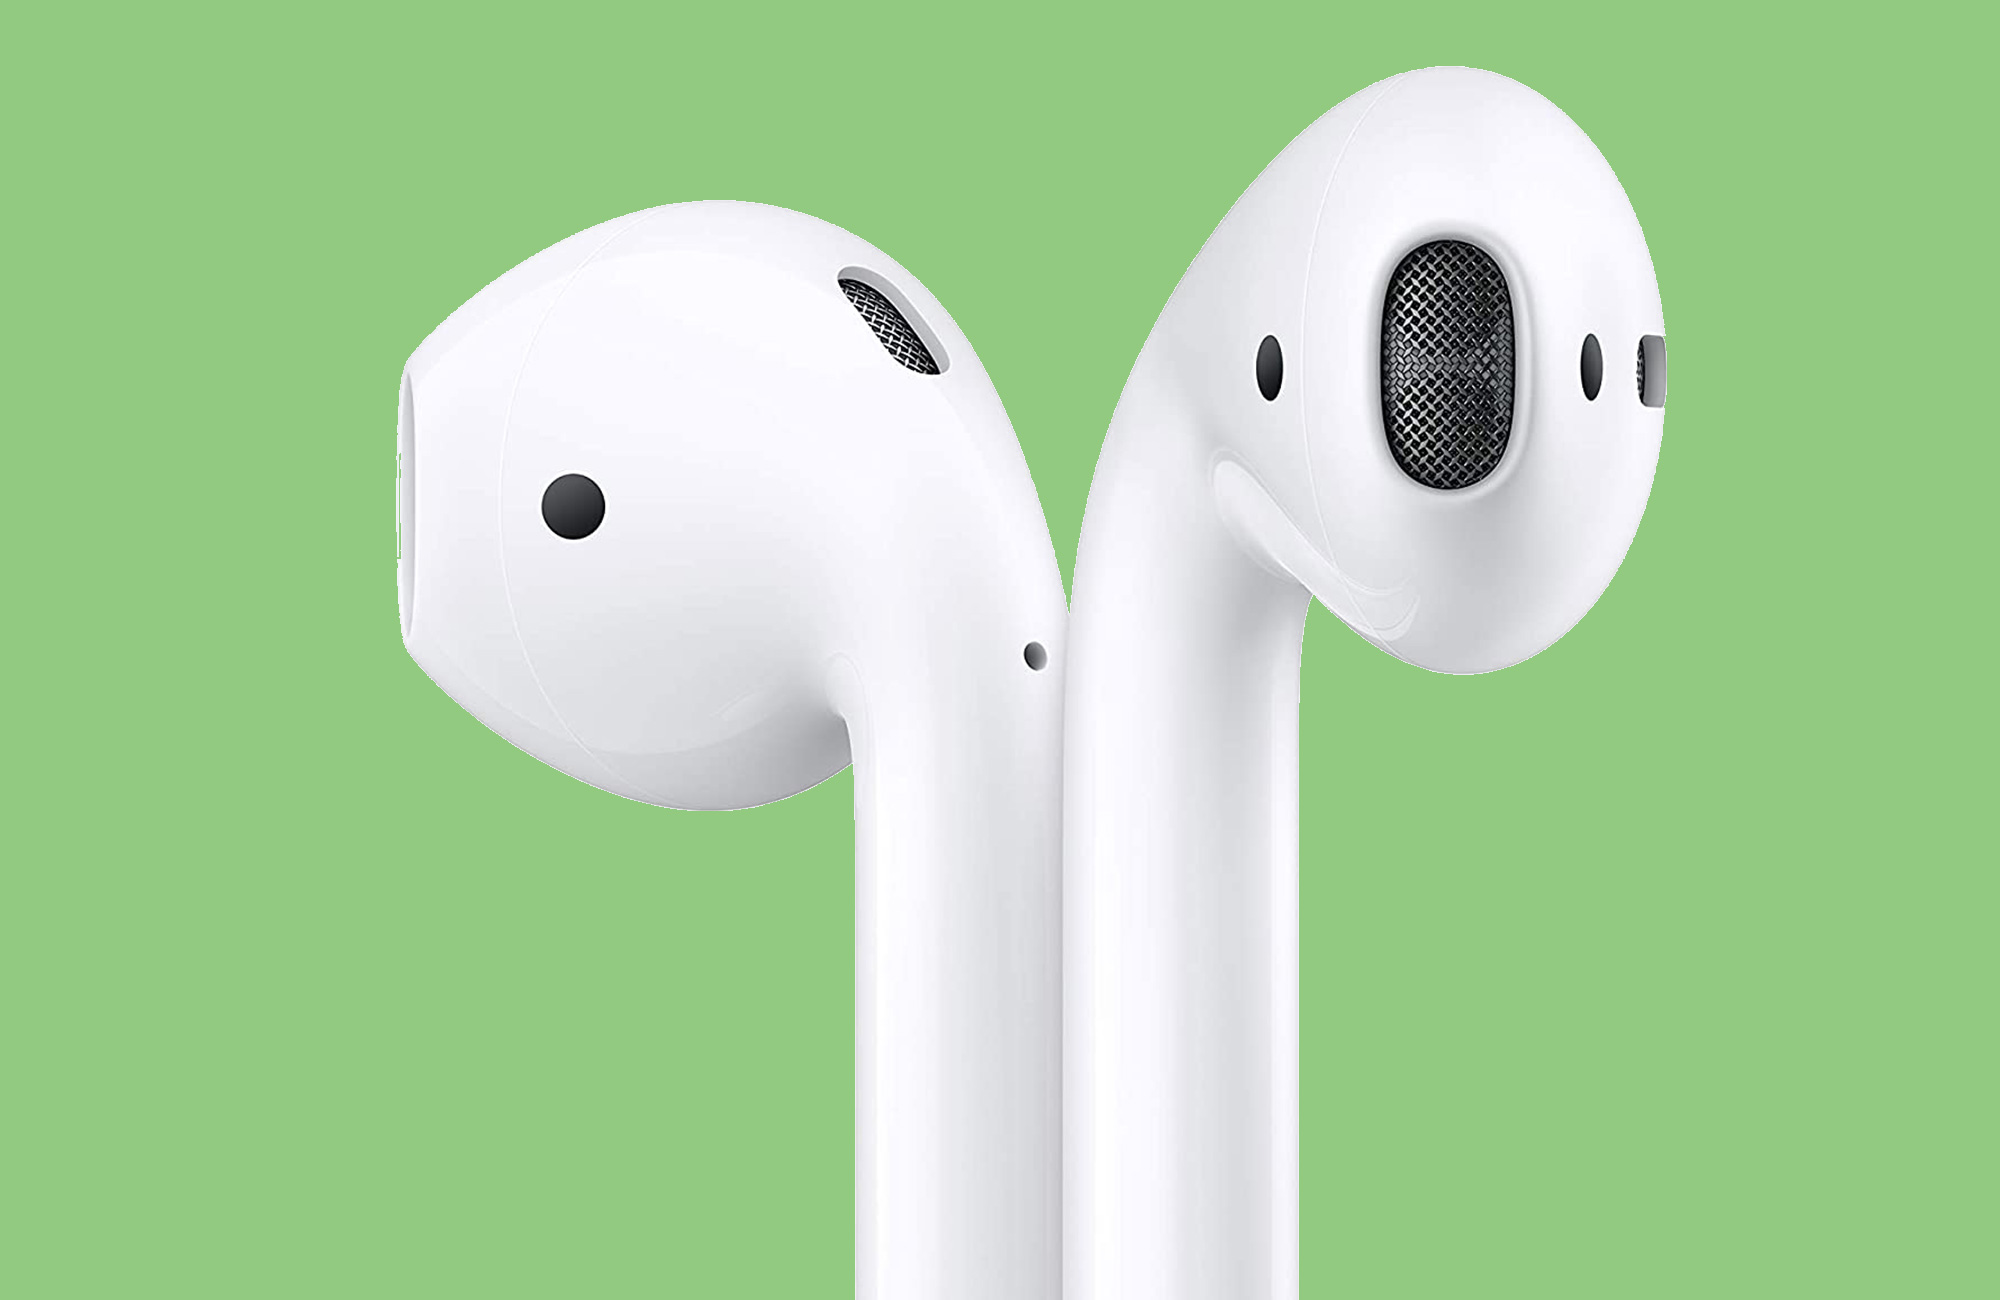 Apple AirPods pro 2 earbuds on a green background.